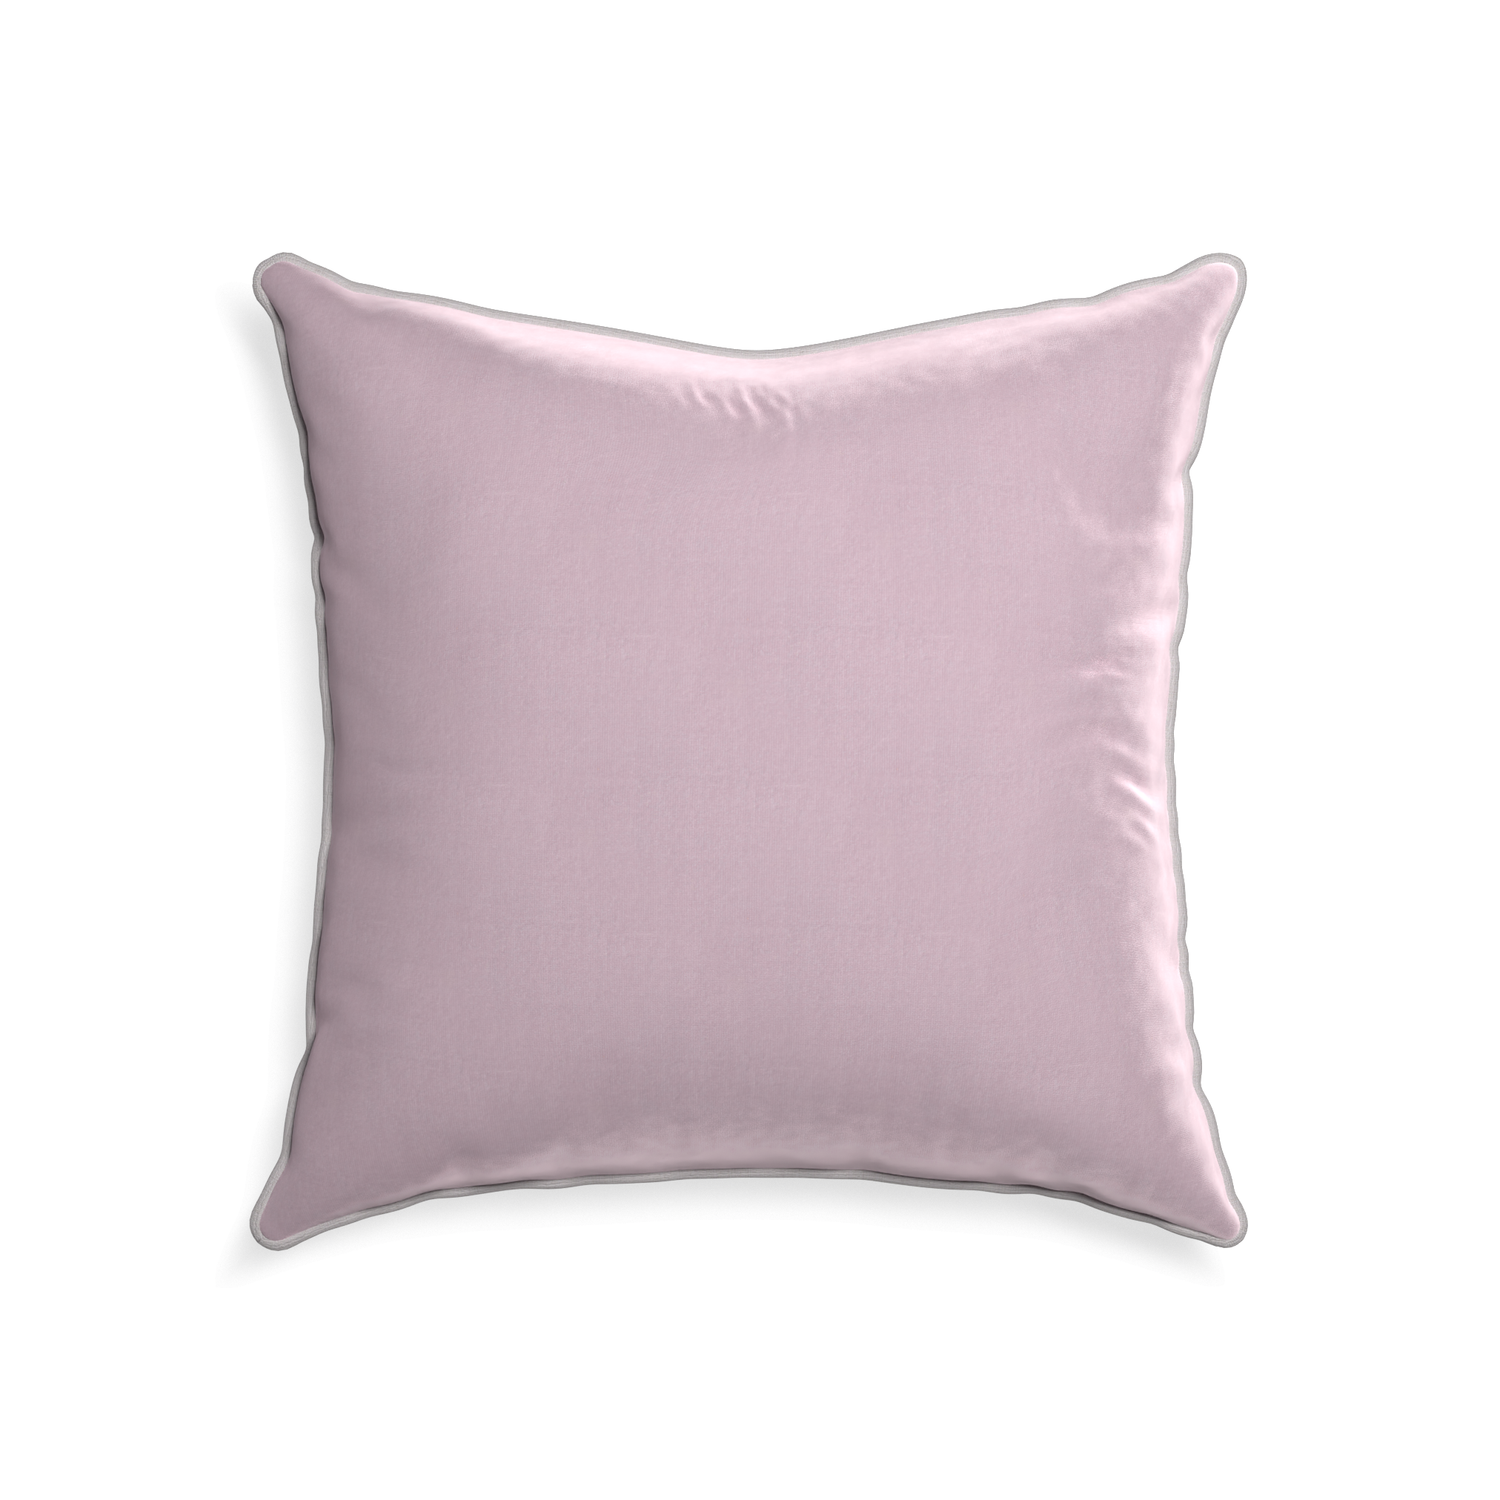 22-square lilac velvet custom lilacpillow with pebble piping on white background